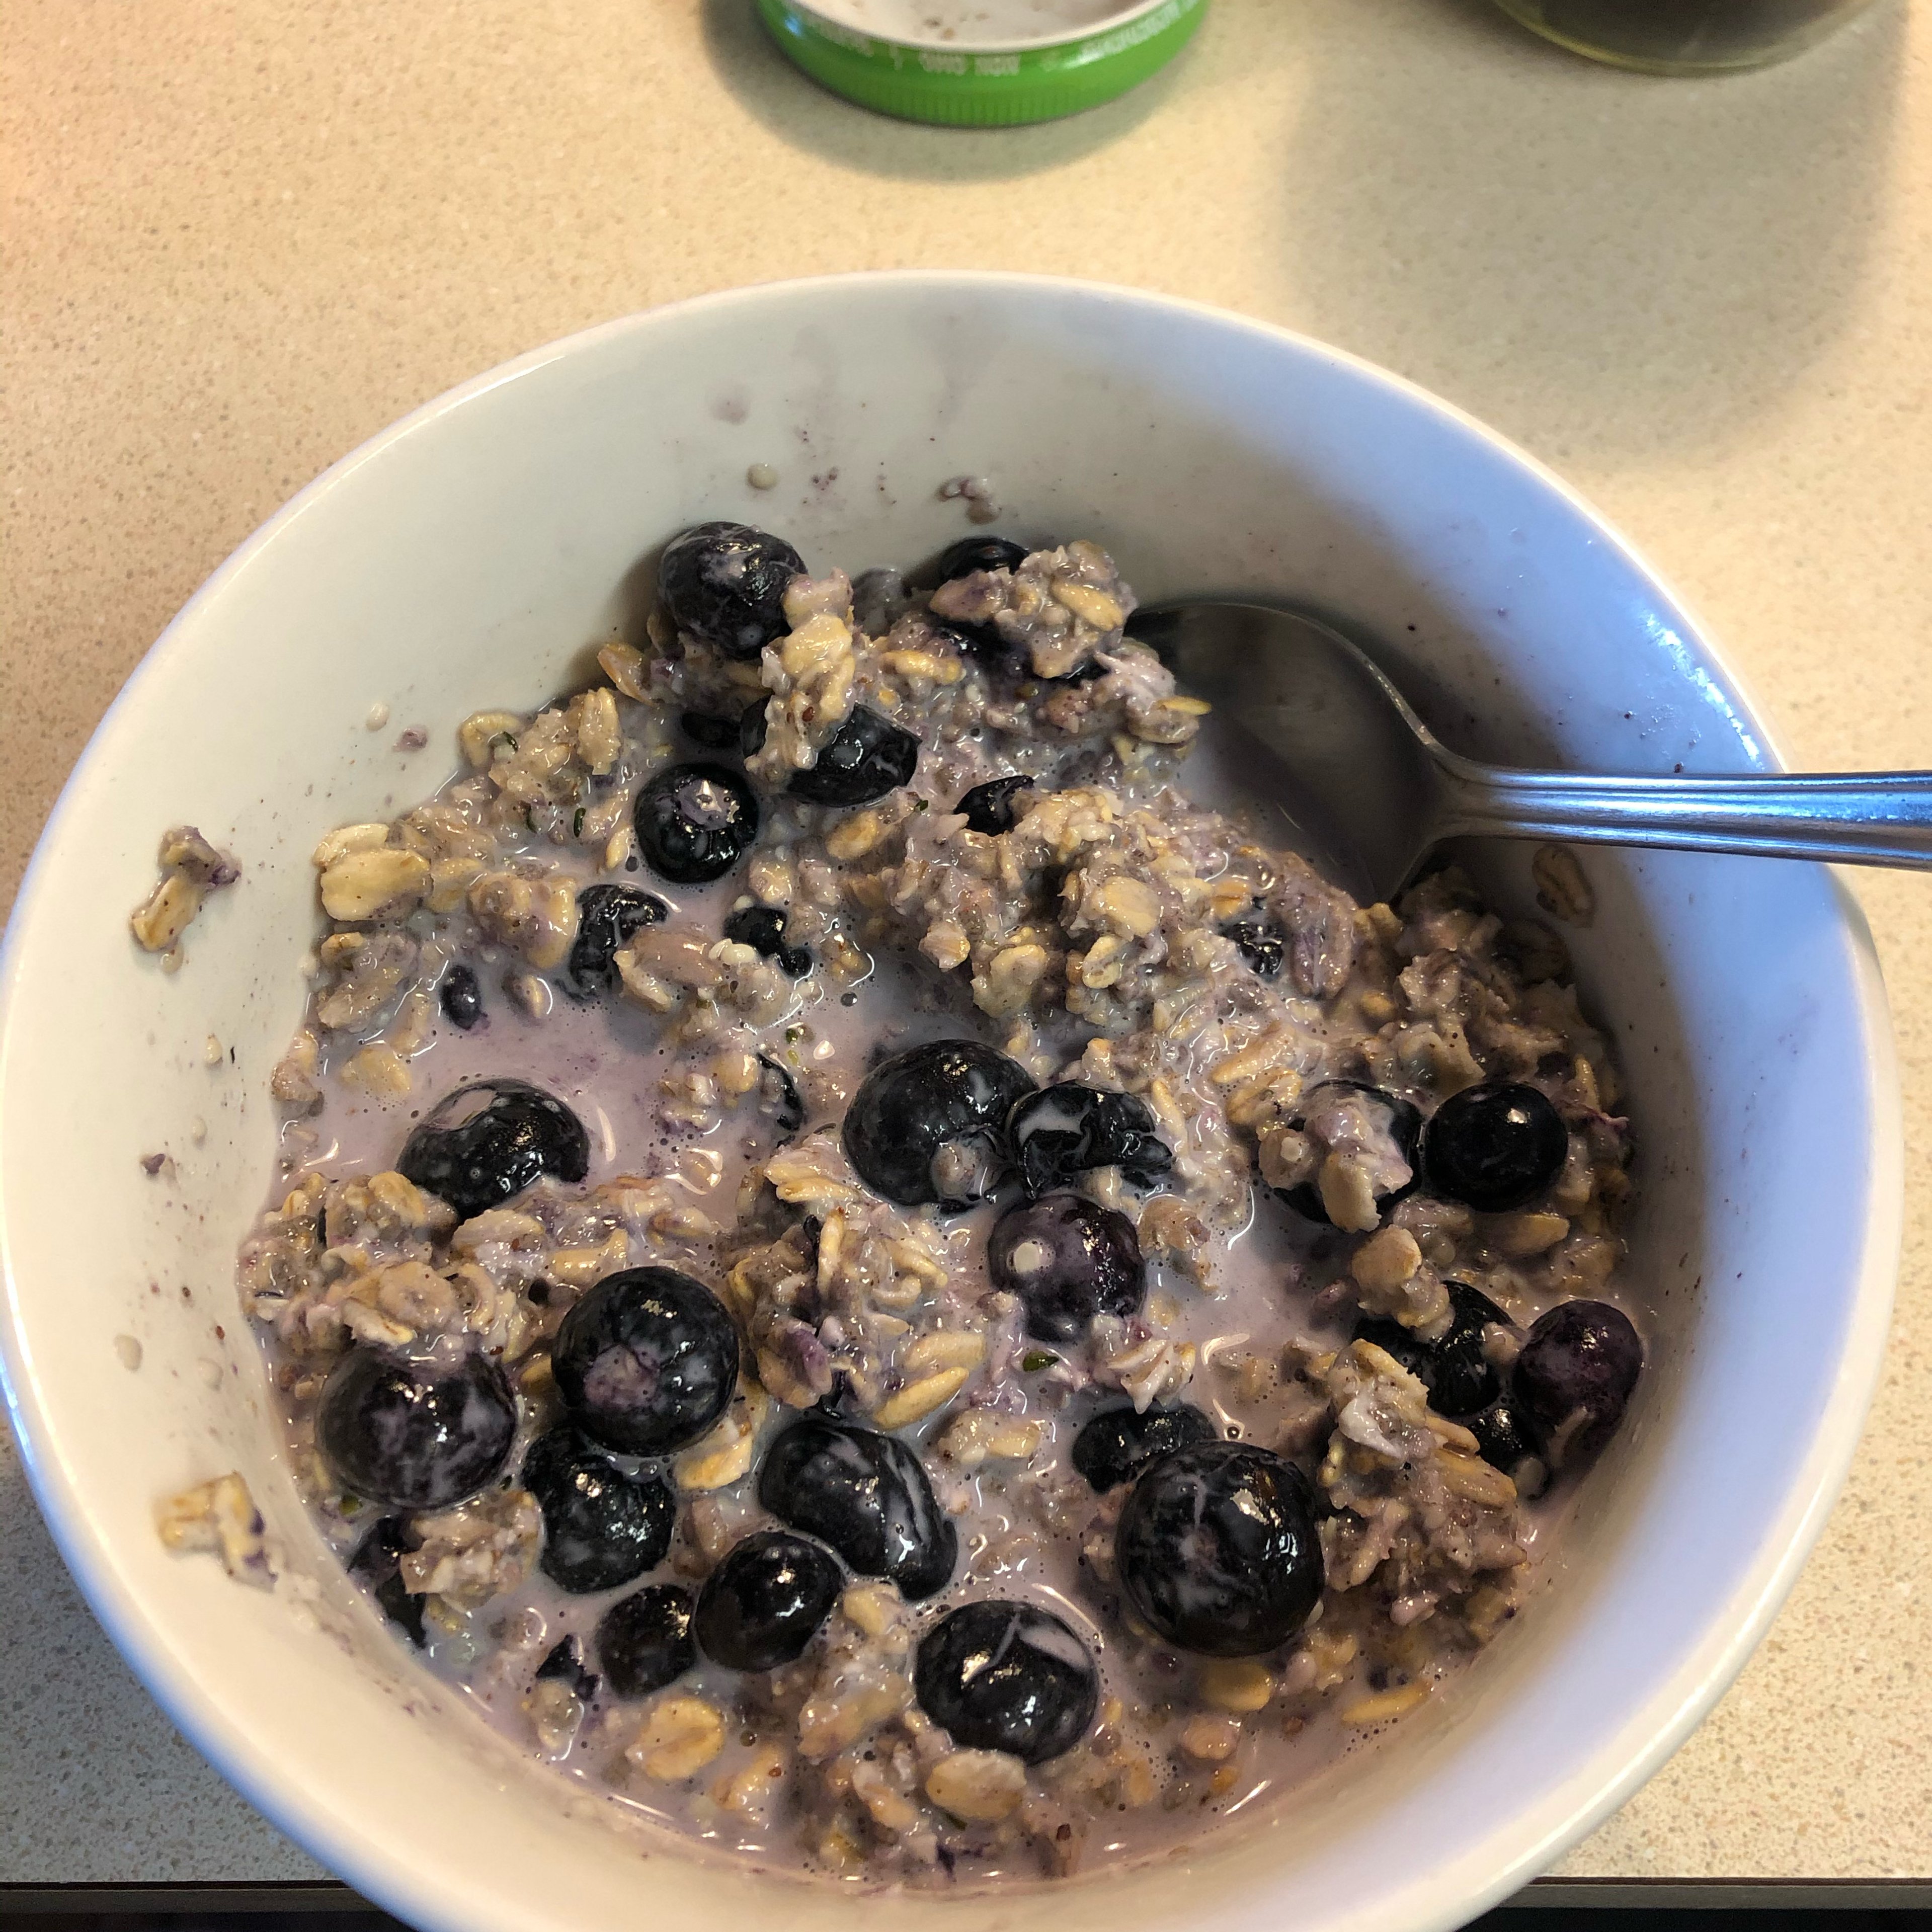 Overnight oats, berries and cream